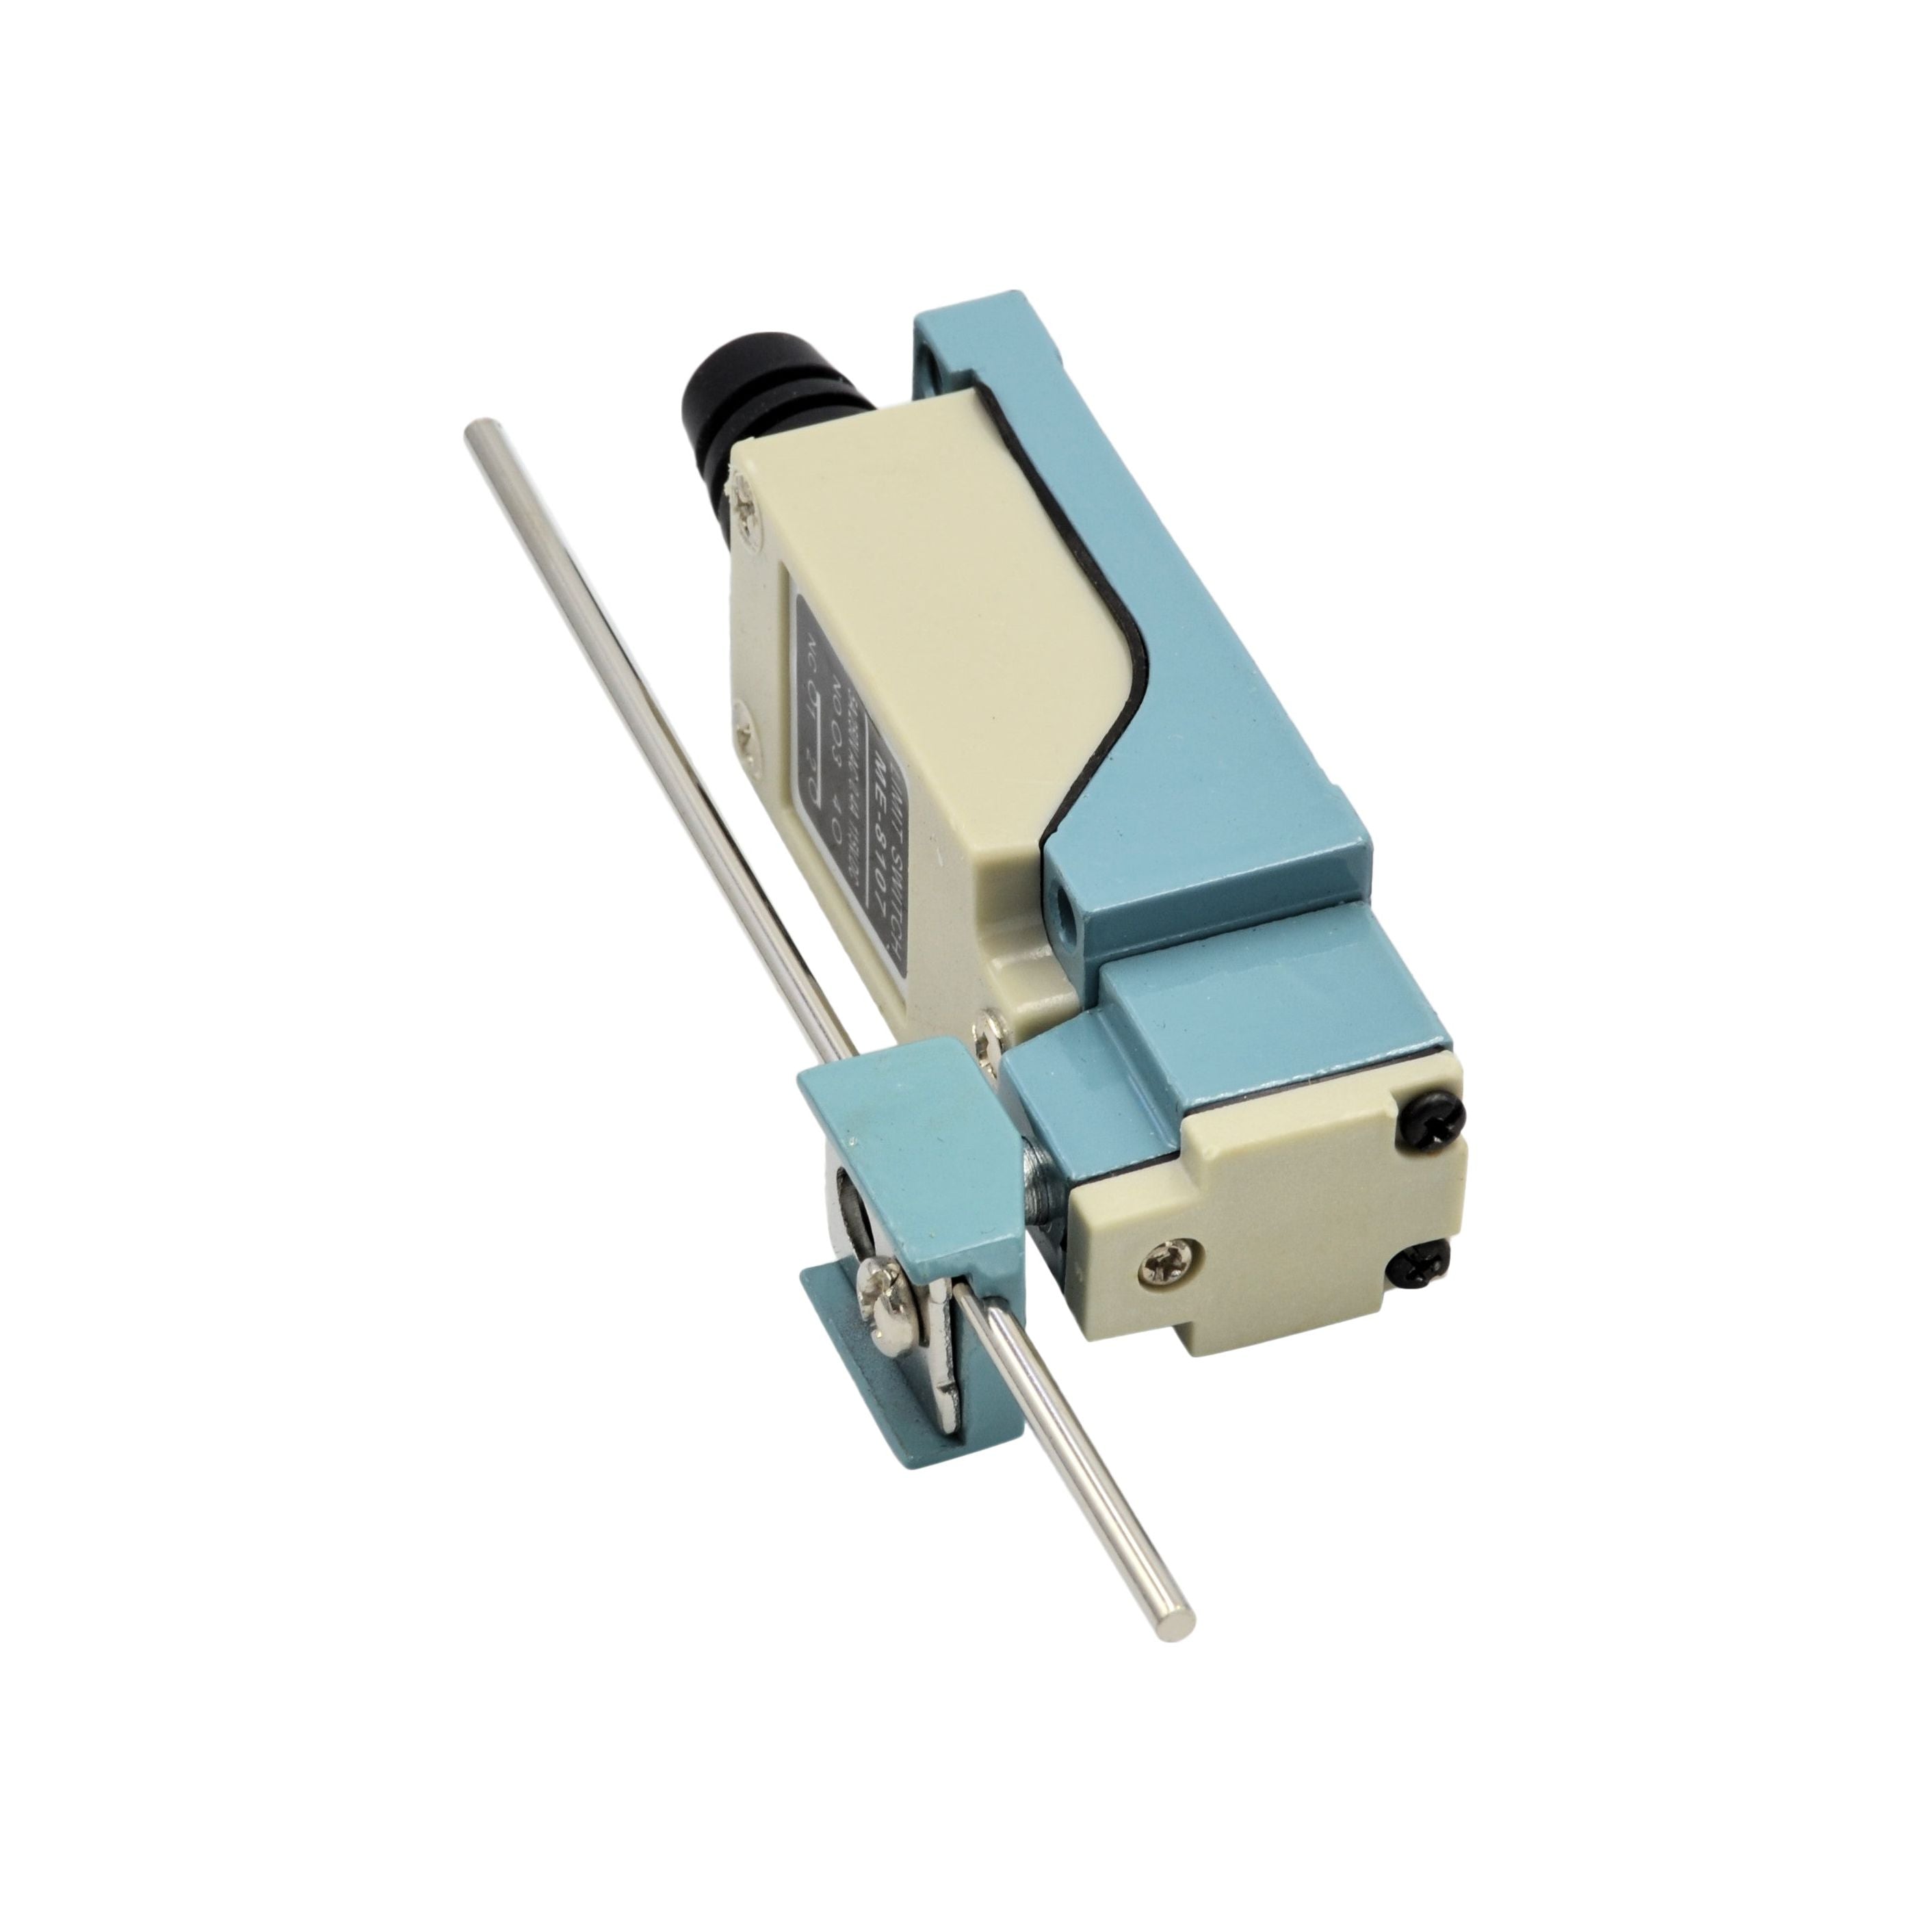 ME-8107 Adjustable Rod Lever Arm Momentary Limit Switch